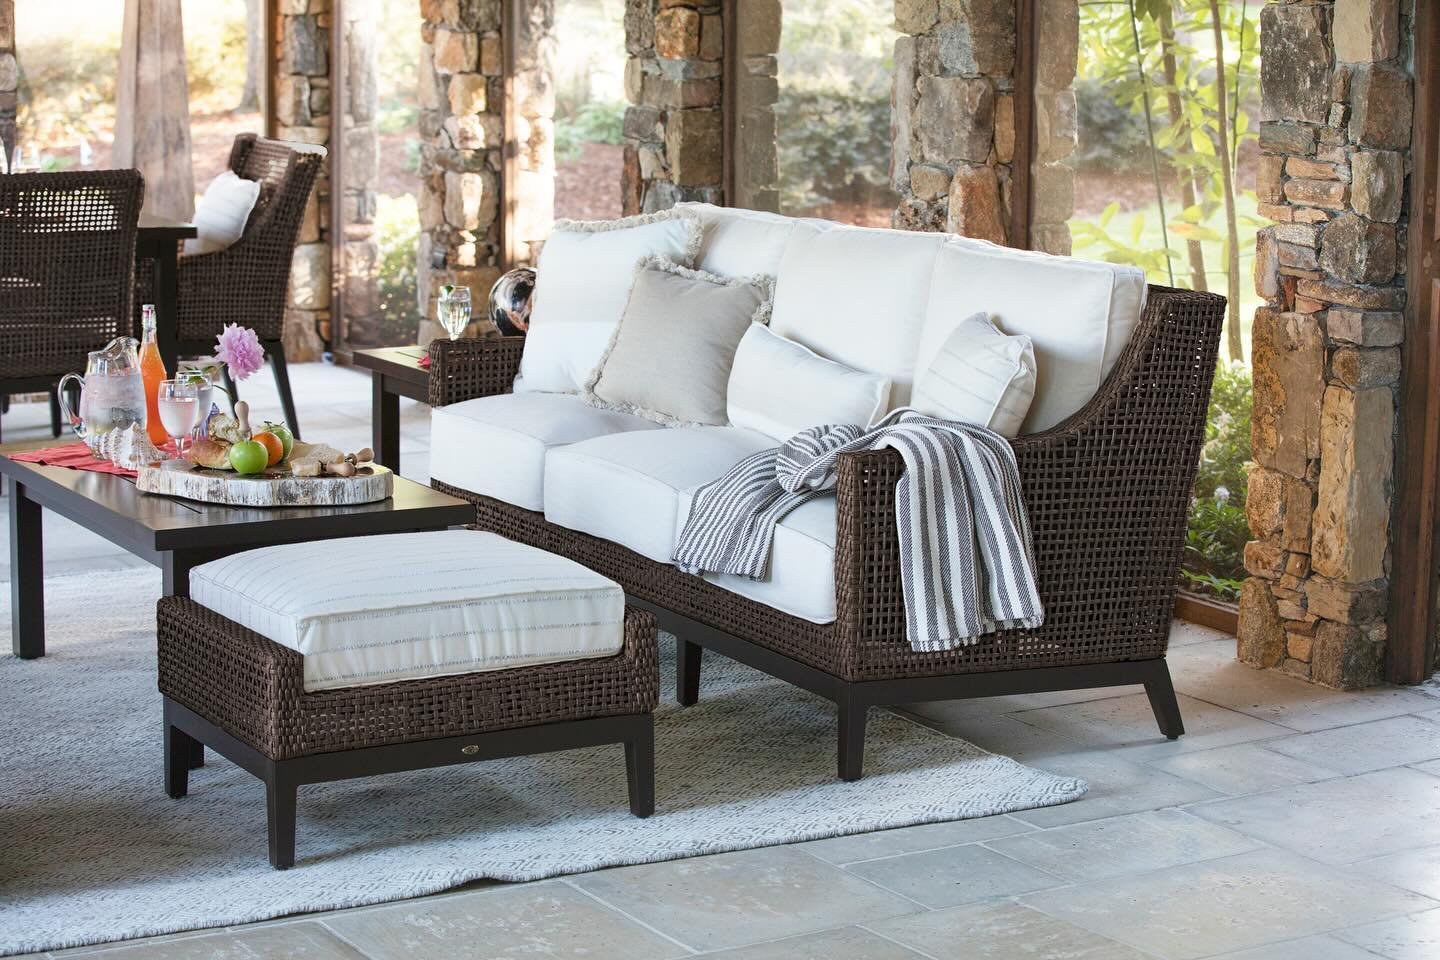 Dare to indulge with @Summerclassics Peninsula Sofa and Ottoman! Experience relaxation like never before!🤩🩷 #outdoor #outdoorliving #liveoutside #chenal #diningoutside #outdoorspaces #littlerock #backyard #shoplocal